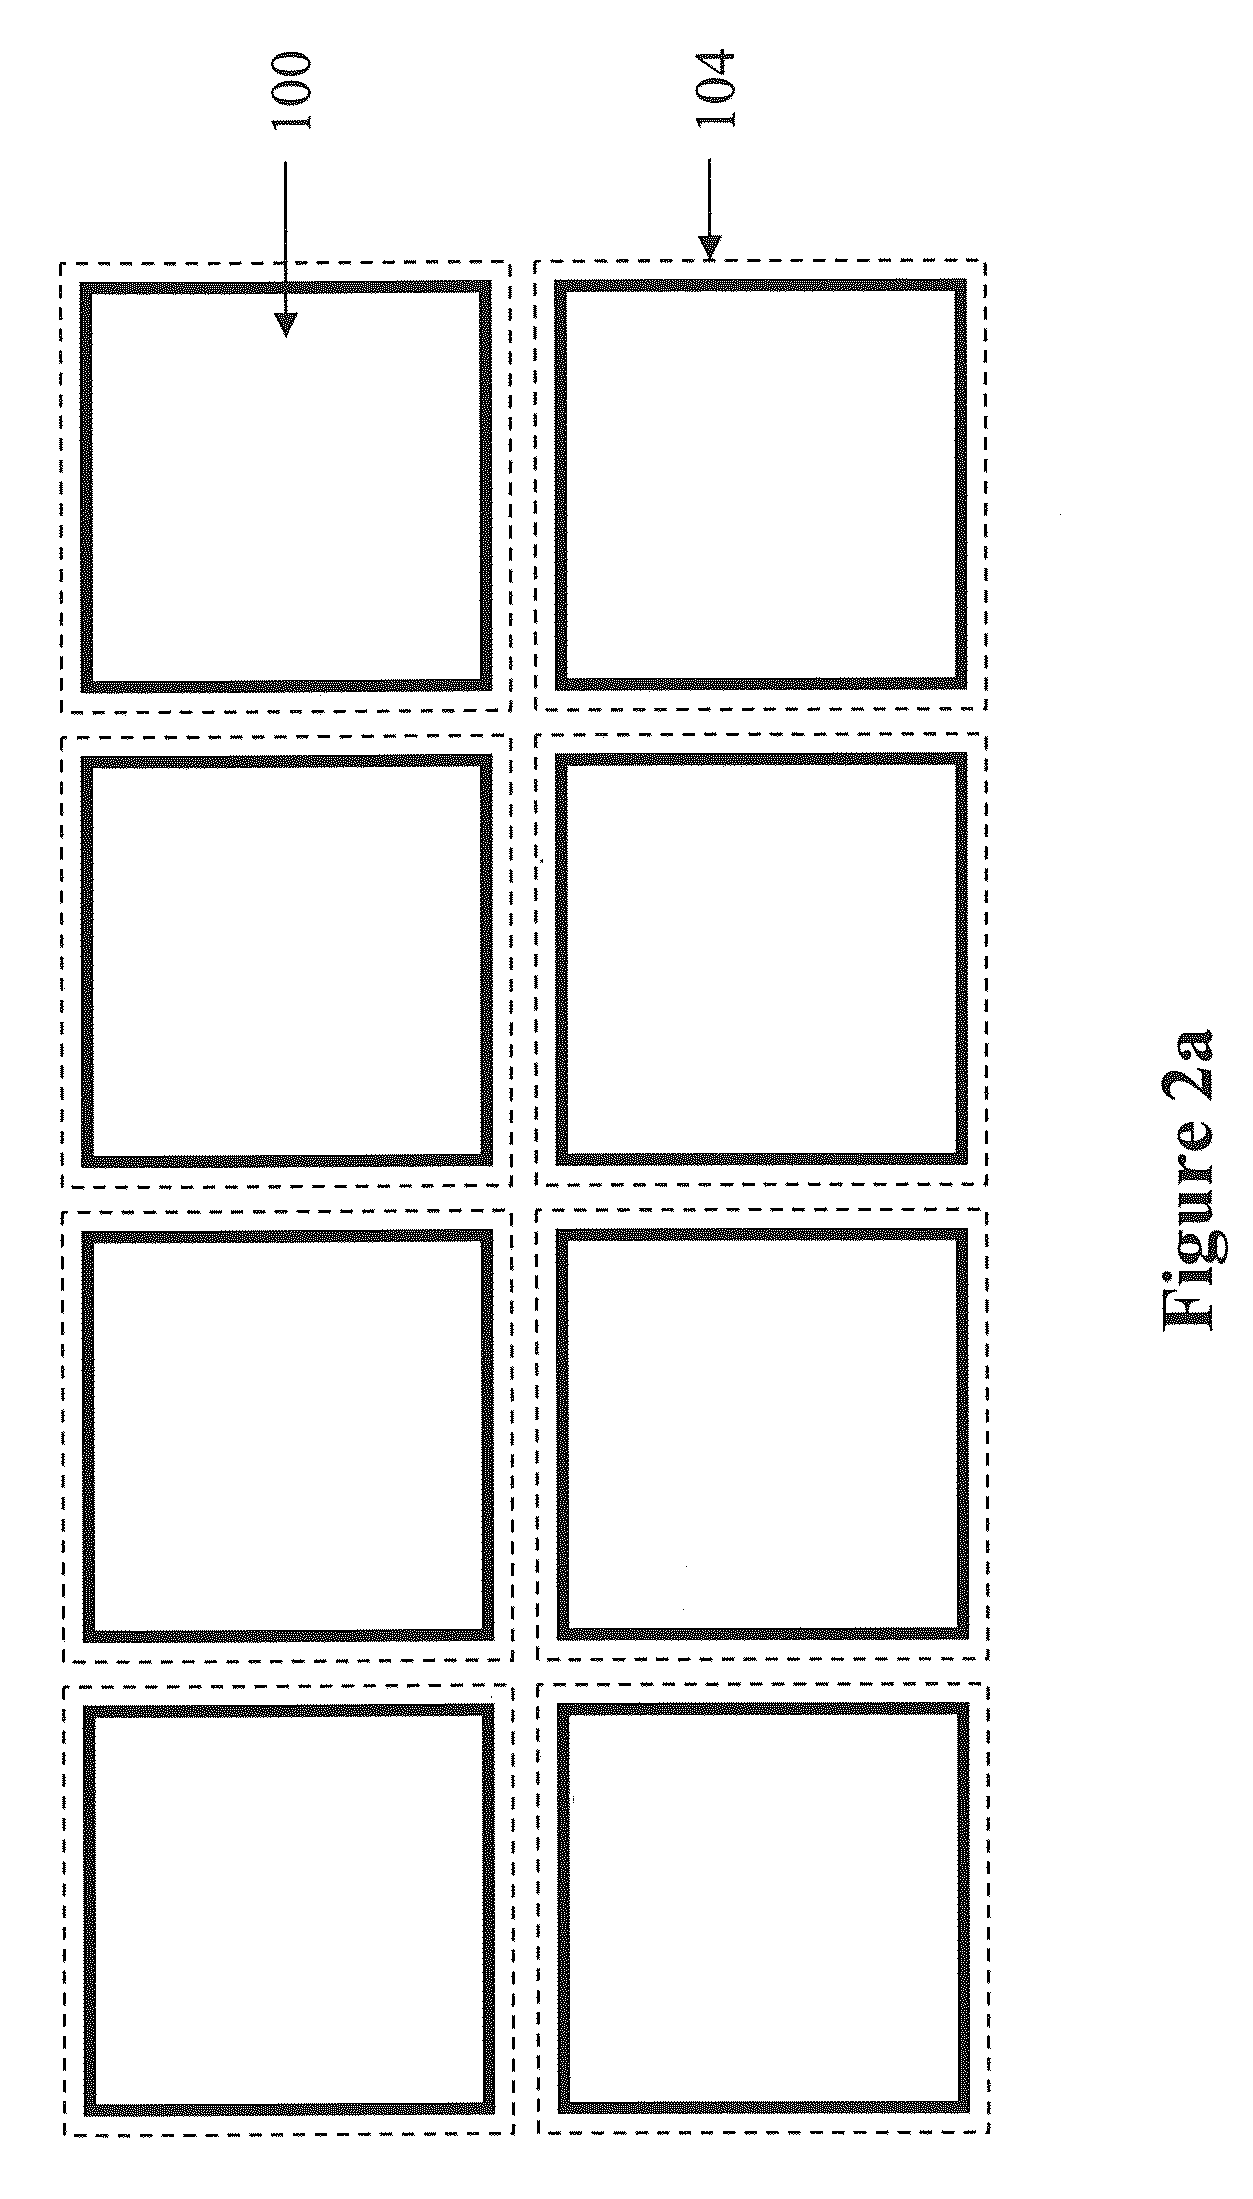 Multicolor display architecture using enhanced dark state